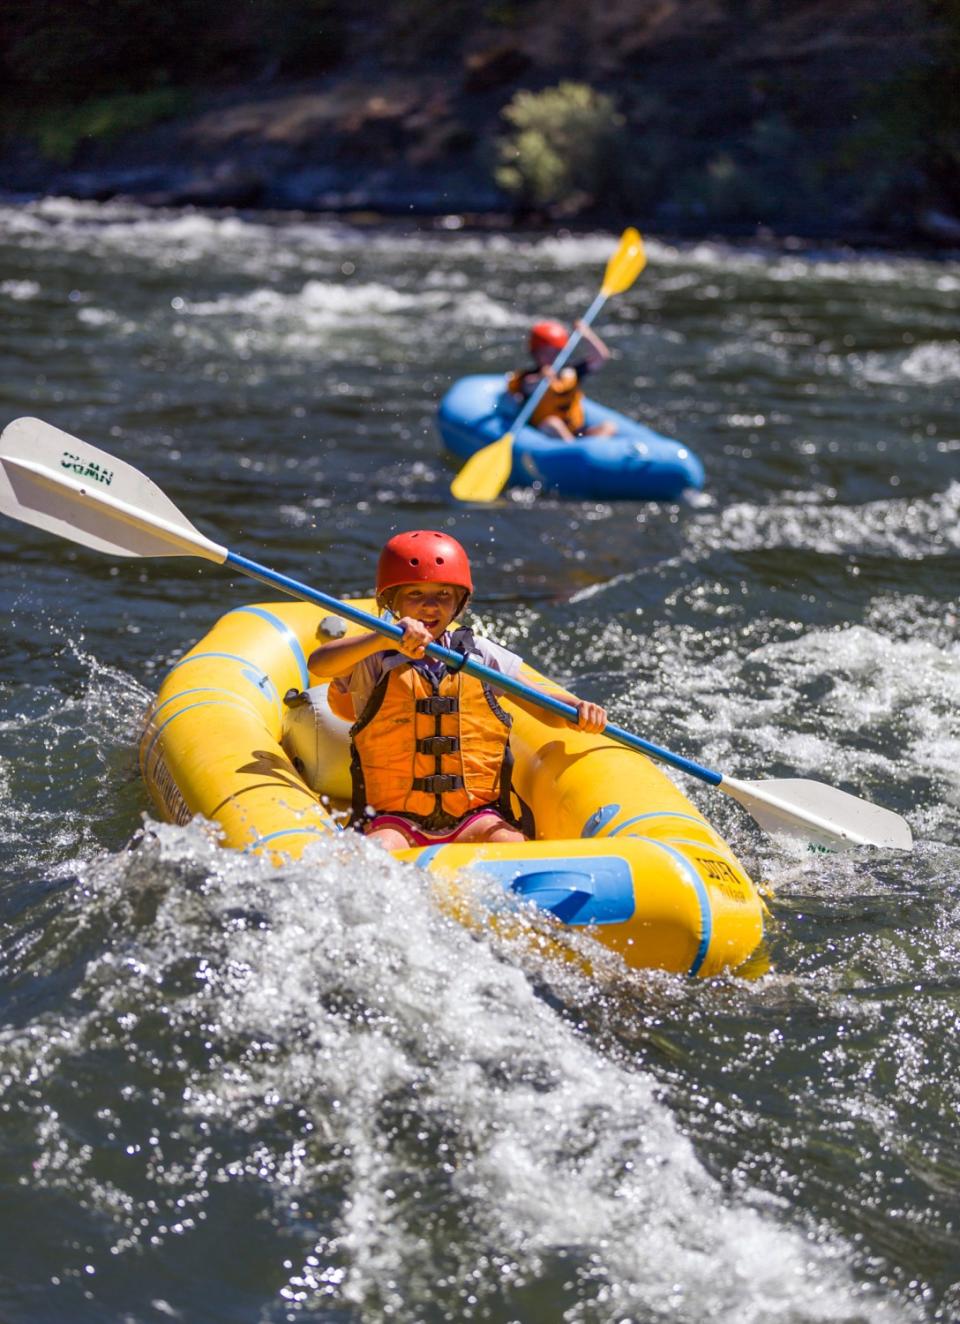 A one-person kayak, shown here on the Rogue River in Oregon, makes social distancing possible on a rafting trip.